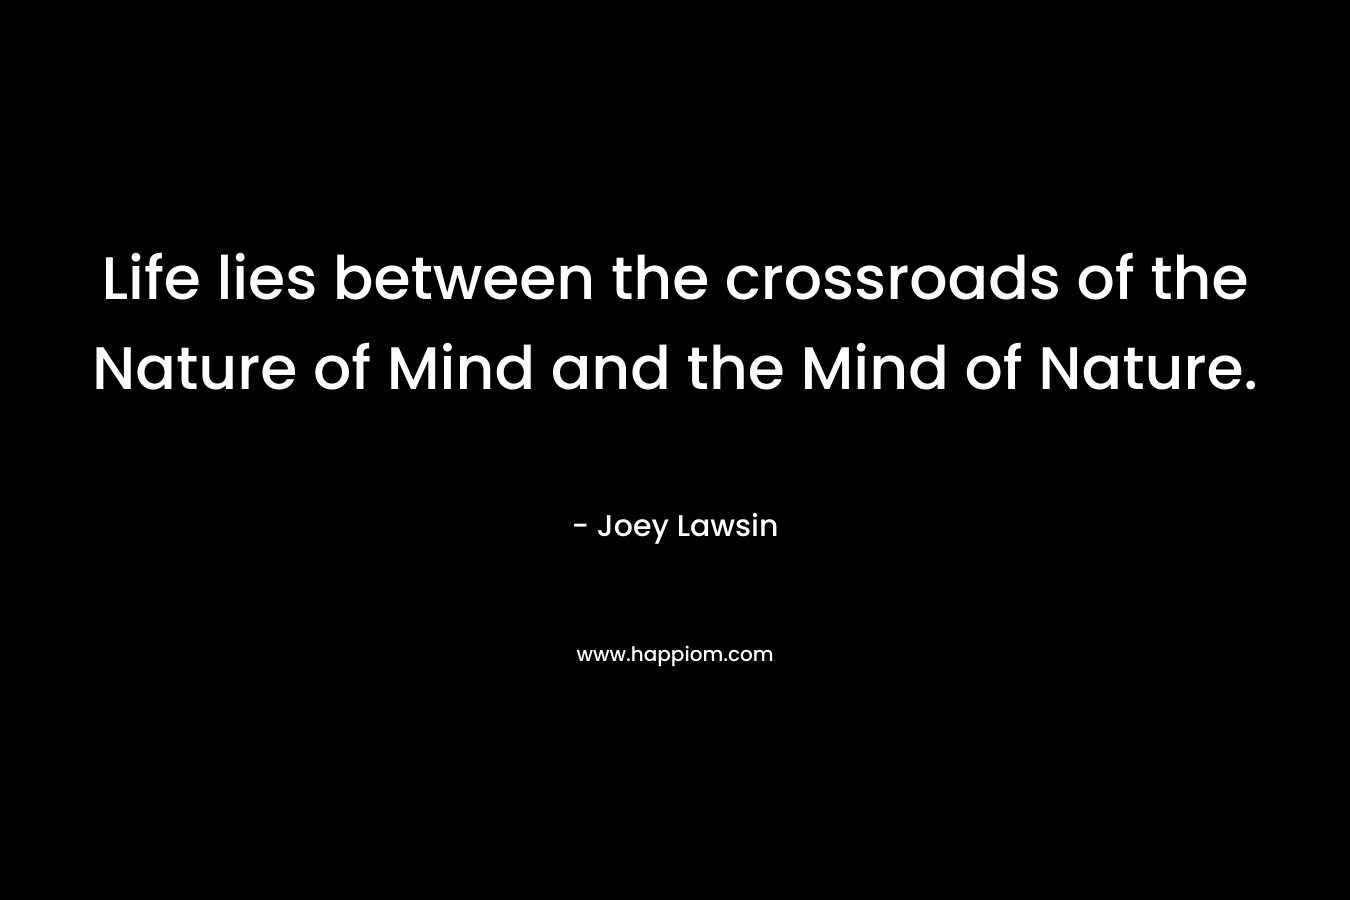 Life lies between the crossroads of the Nature of Mind and the Mind of Nature.